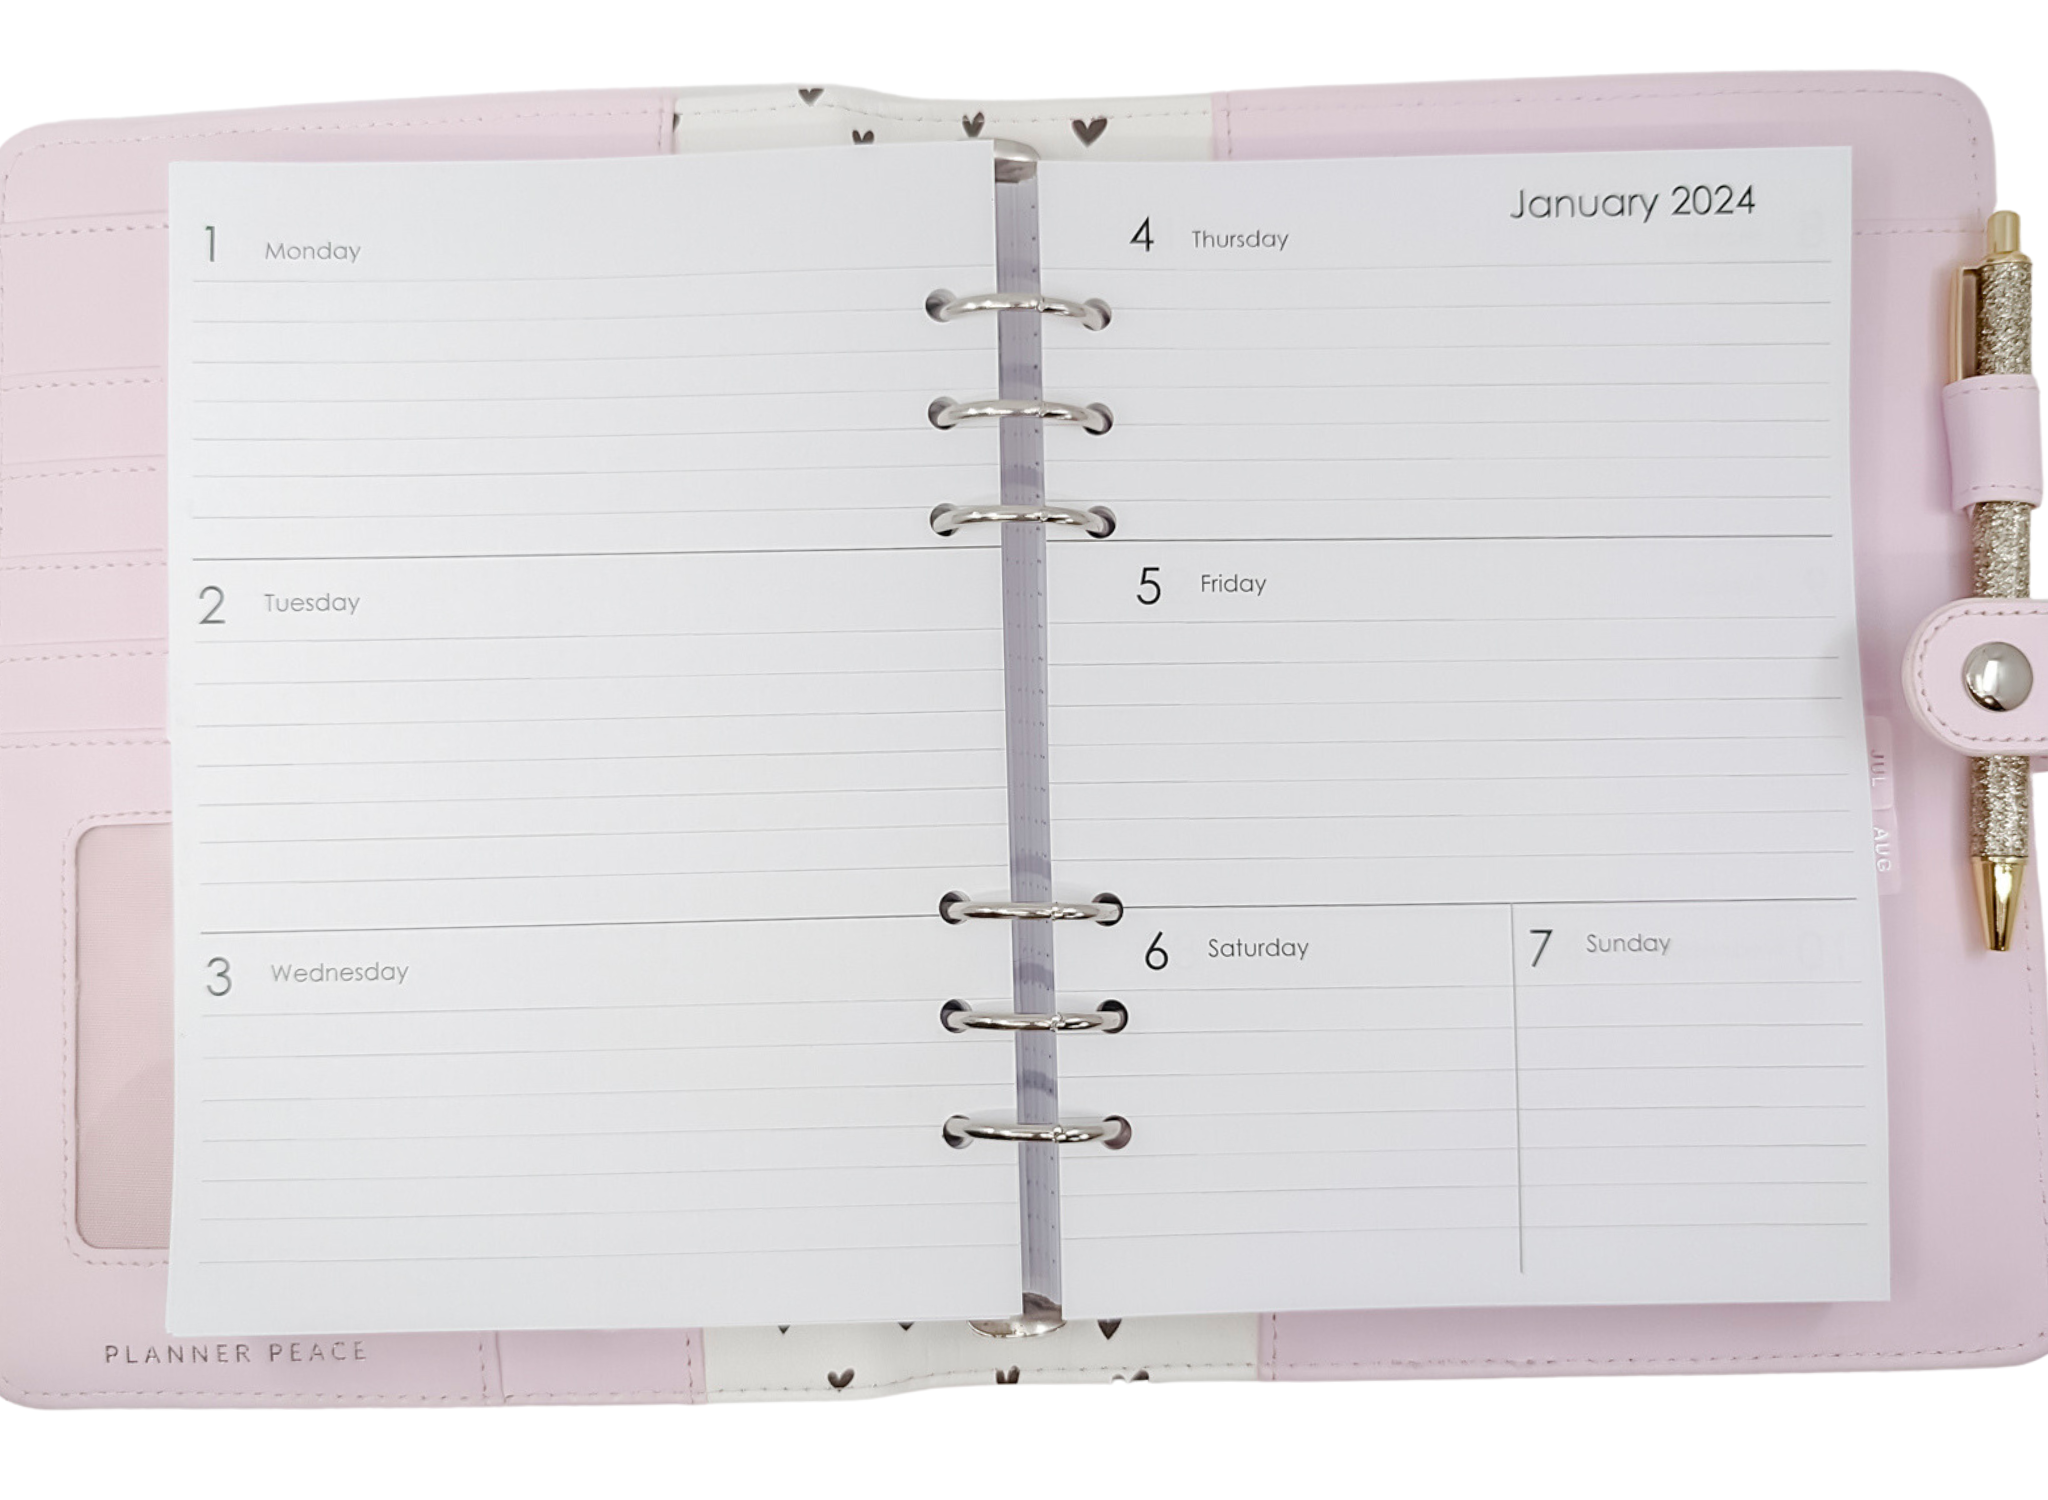 Important Dates: A5 Planner inserts - Minimal 6 ring agenda refill